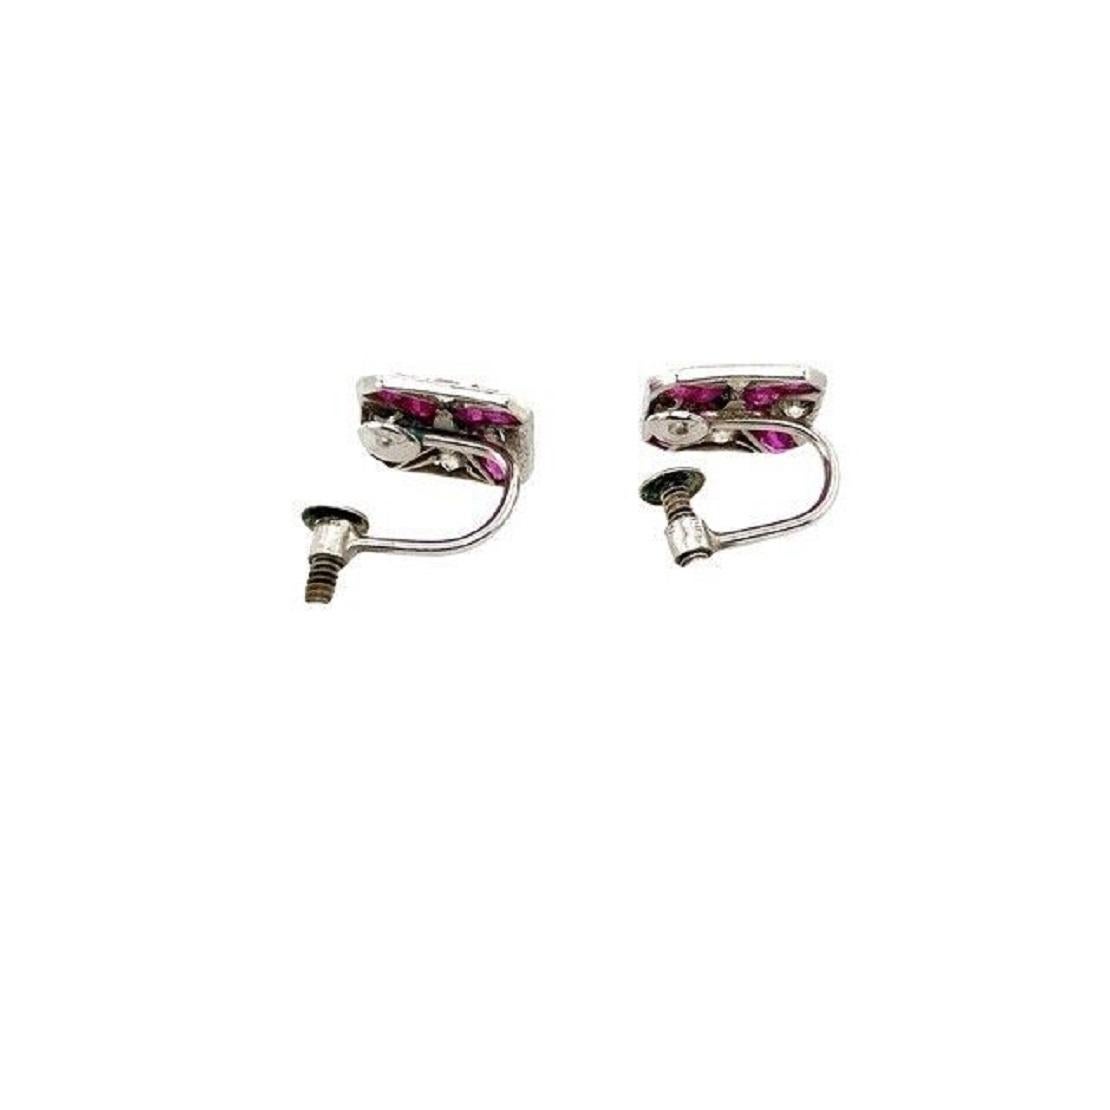 These vintage ruby earrings are beautiful. Set in platinum and 9ct white gold screws, with 0.25ct diamonds and 0.65ct rubies.

Additional Information:
Total Weight: 2.5g
Earrings Dimension: 9.65mm
Total Diamond Weight: 0.25ct
Diamond Clarity: